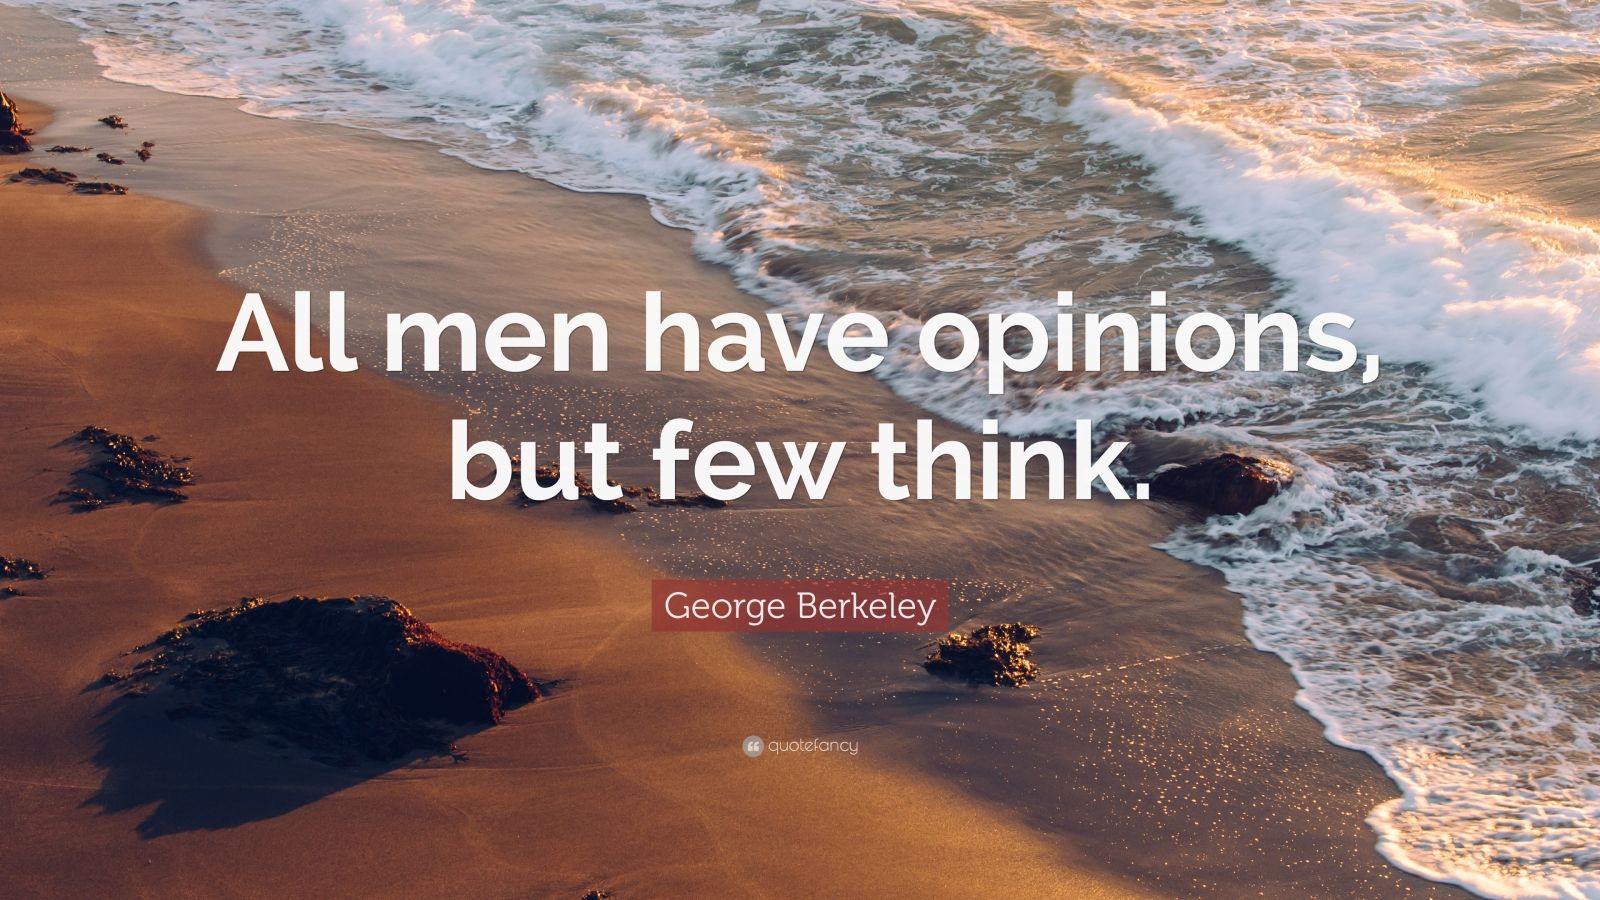 George Berkeley Quote: “All men have opinions, but few think.” (10